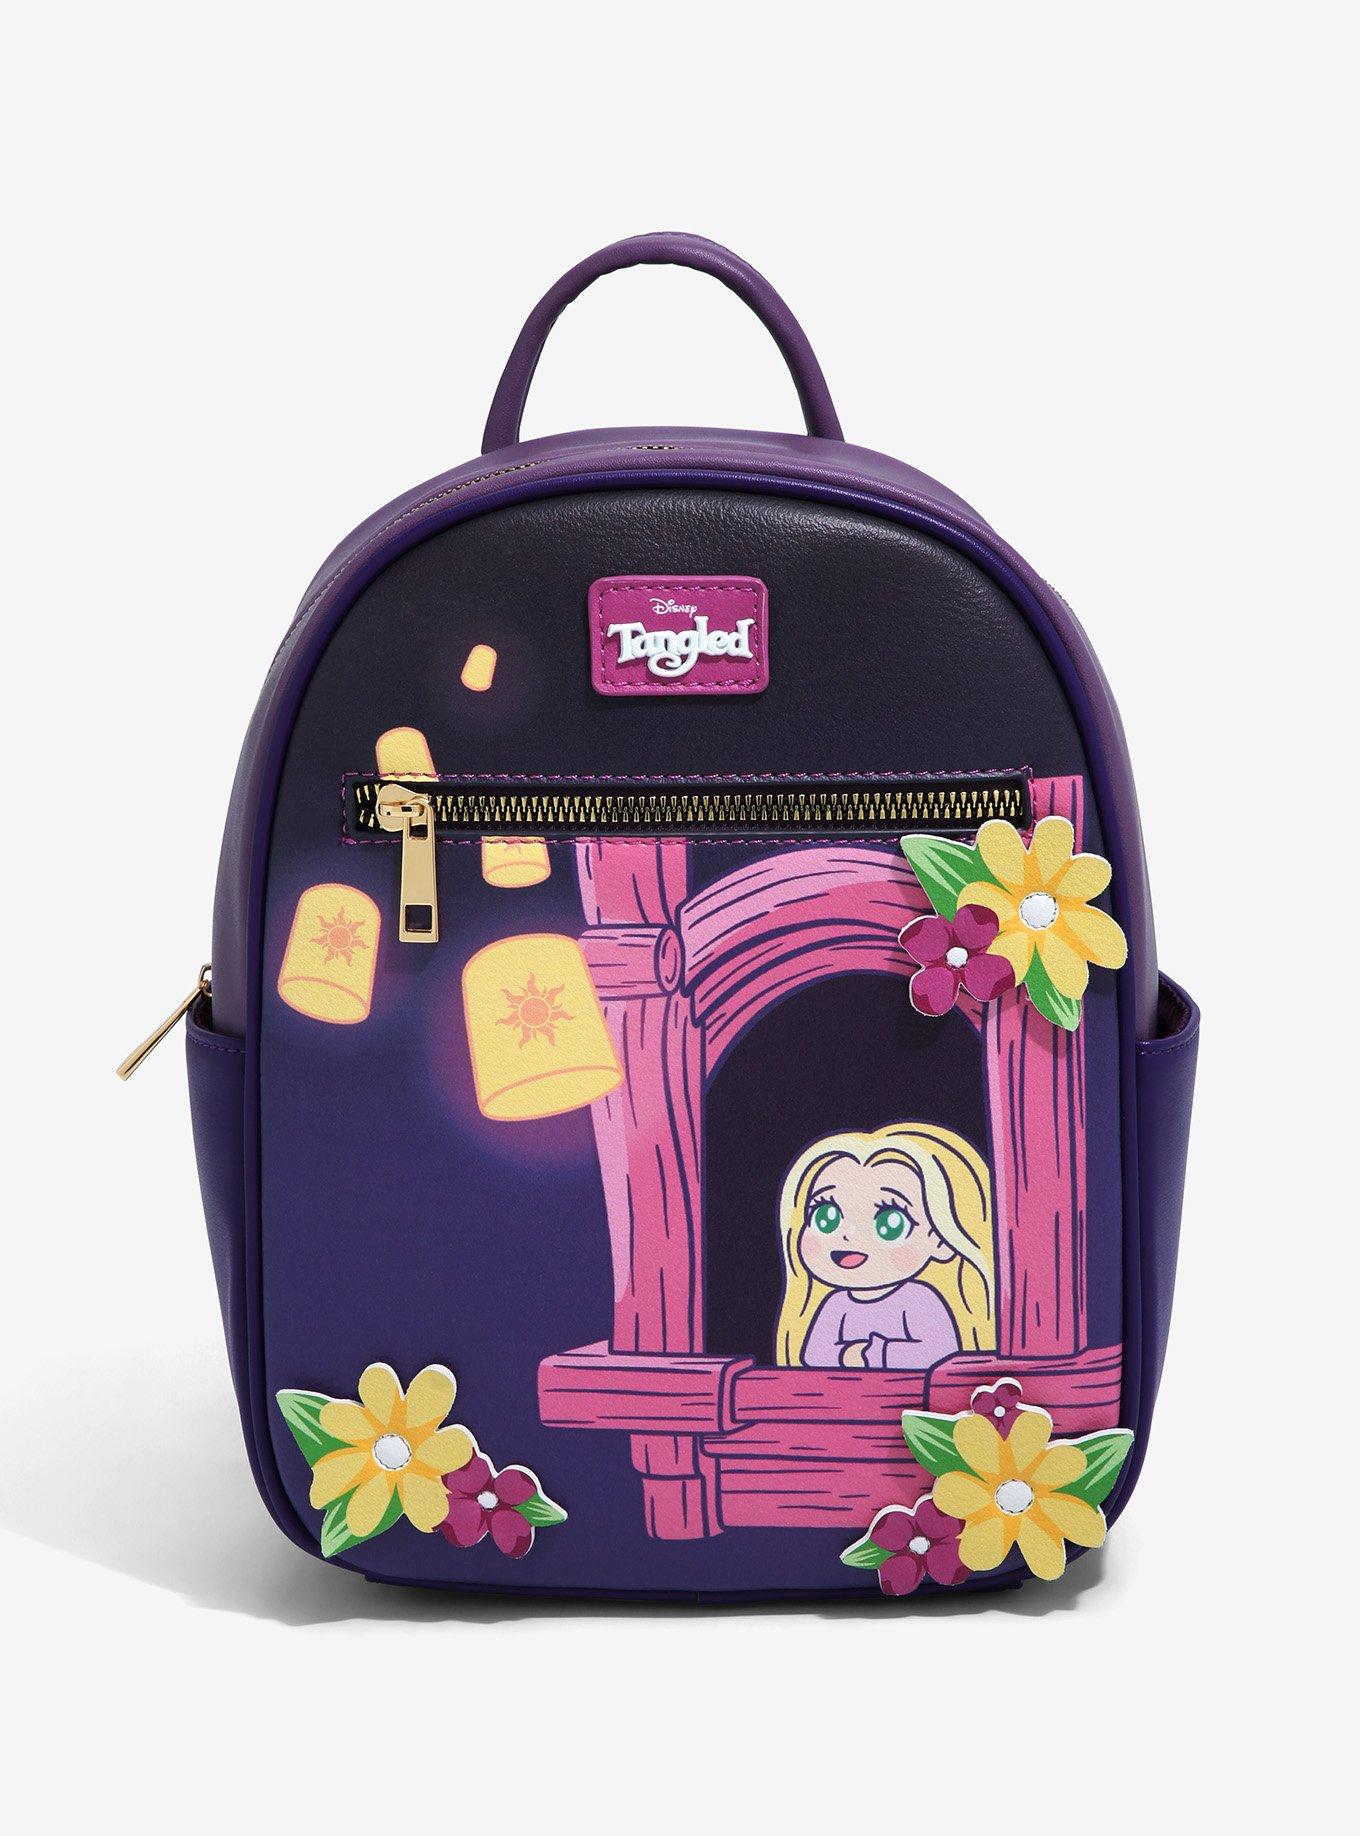 Loungefly Disney Tangled Lanterns Light-Up Mini Backpack Available for  Pre-Order Exclusively at Boxlunch 